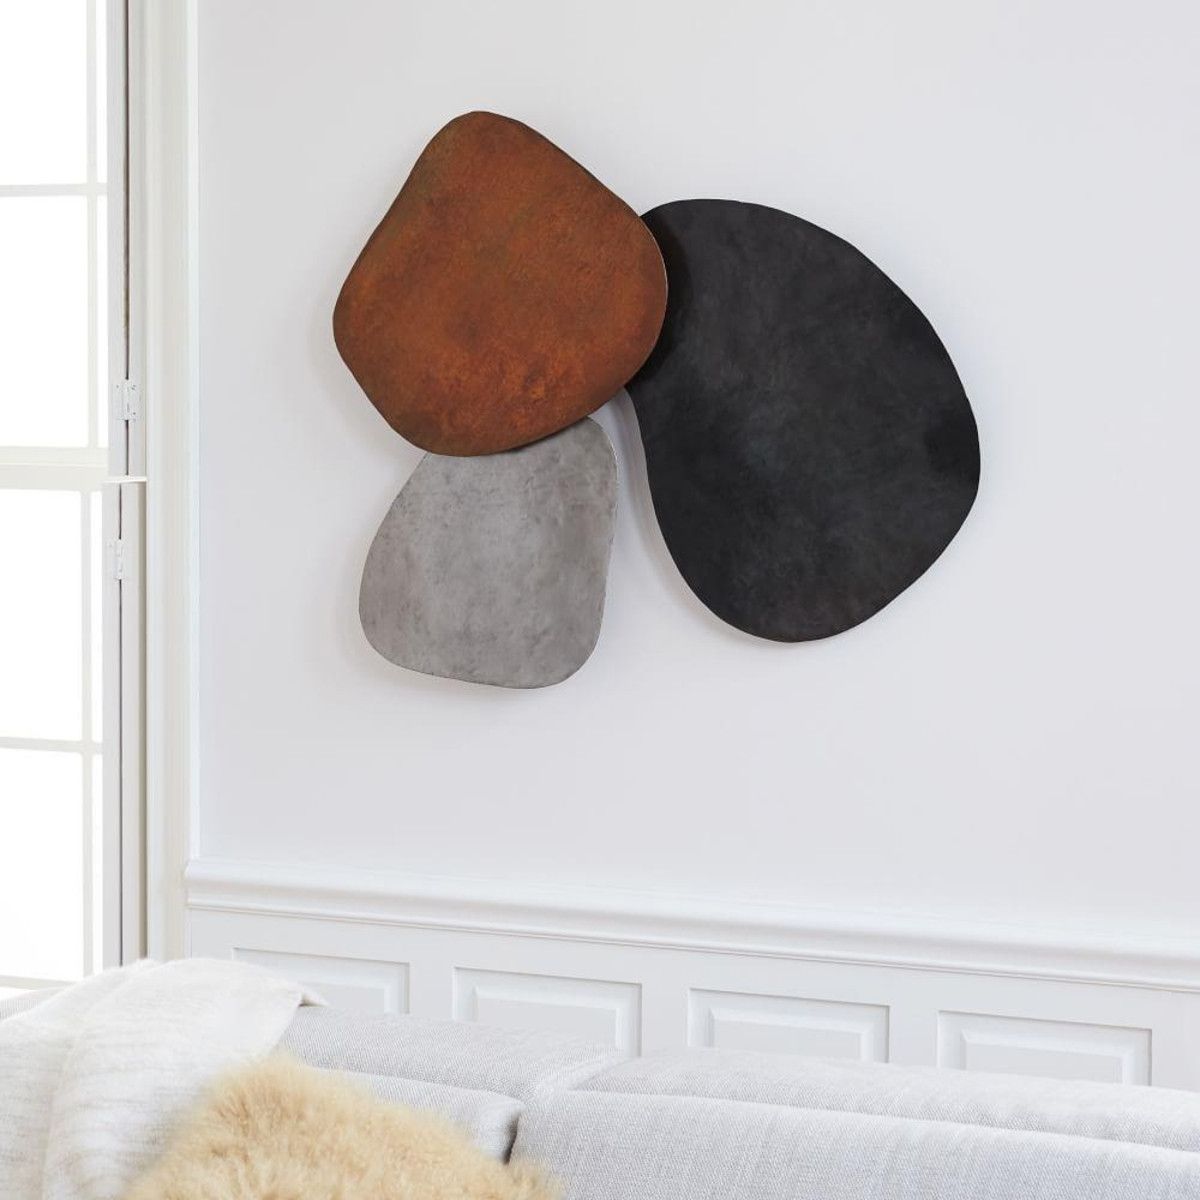 Media Superb West Elm Wall Art – Home Design And Wall Decoration Ideas Within West Elm Wall Art (View 5 of 20)